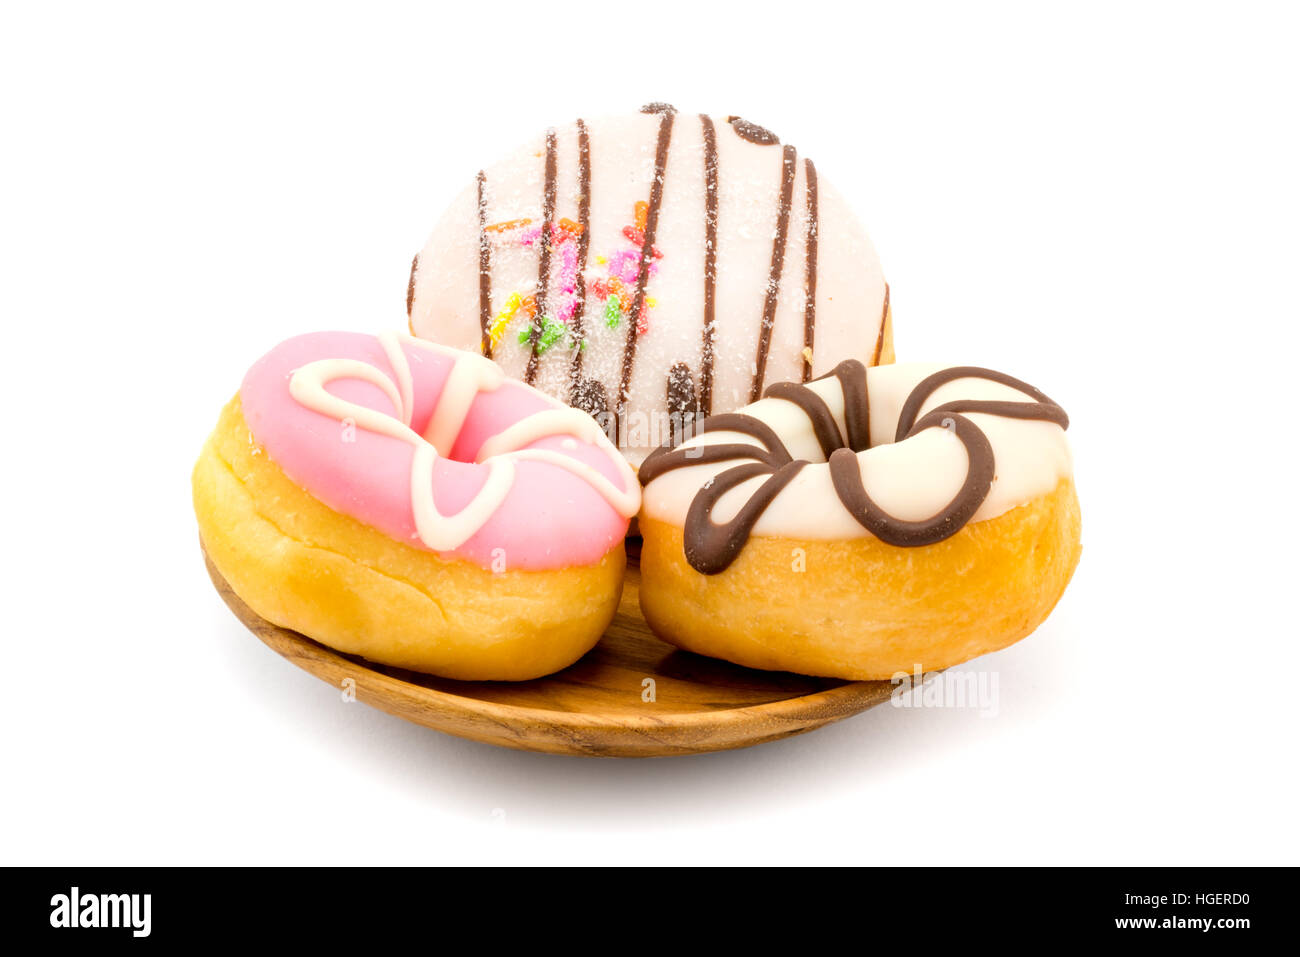 Colorful tasty doughnuts in wooden plate on white background Stock Photo